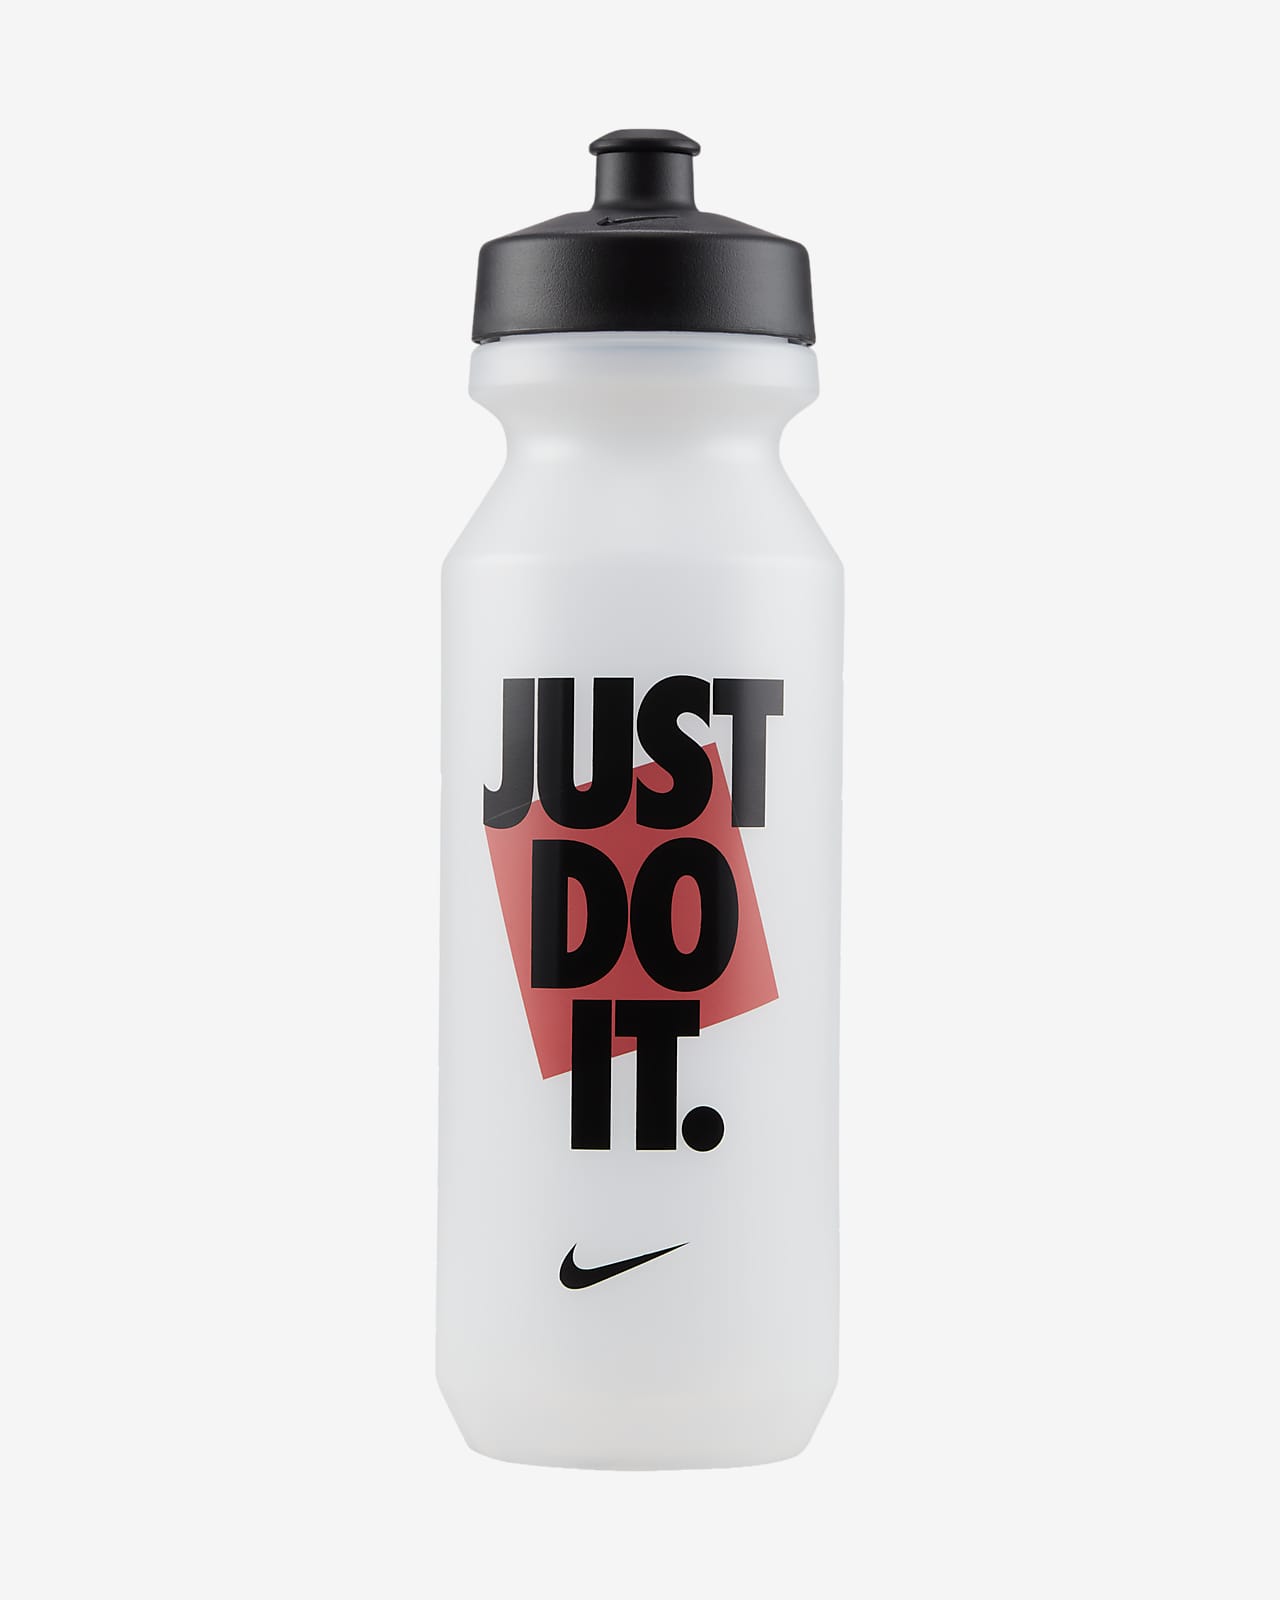 Nike 32oz Big Mouth Graphic Water Bottle